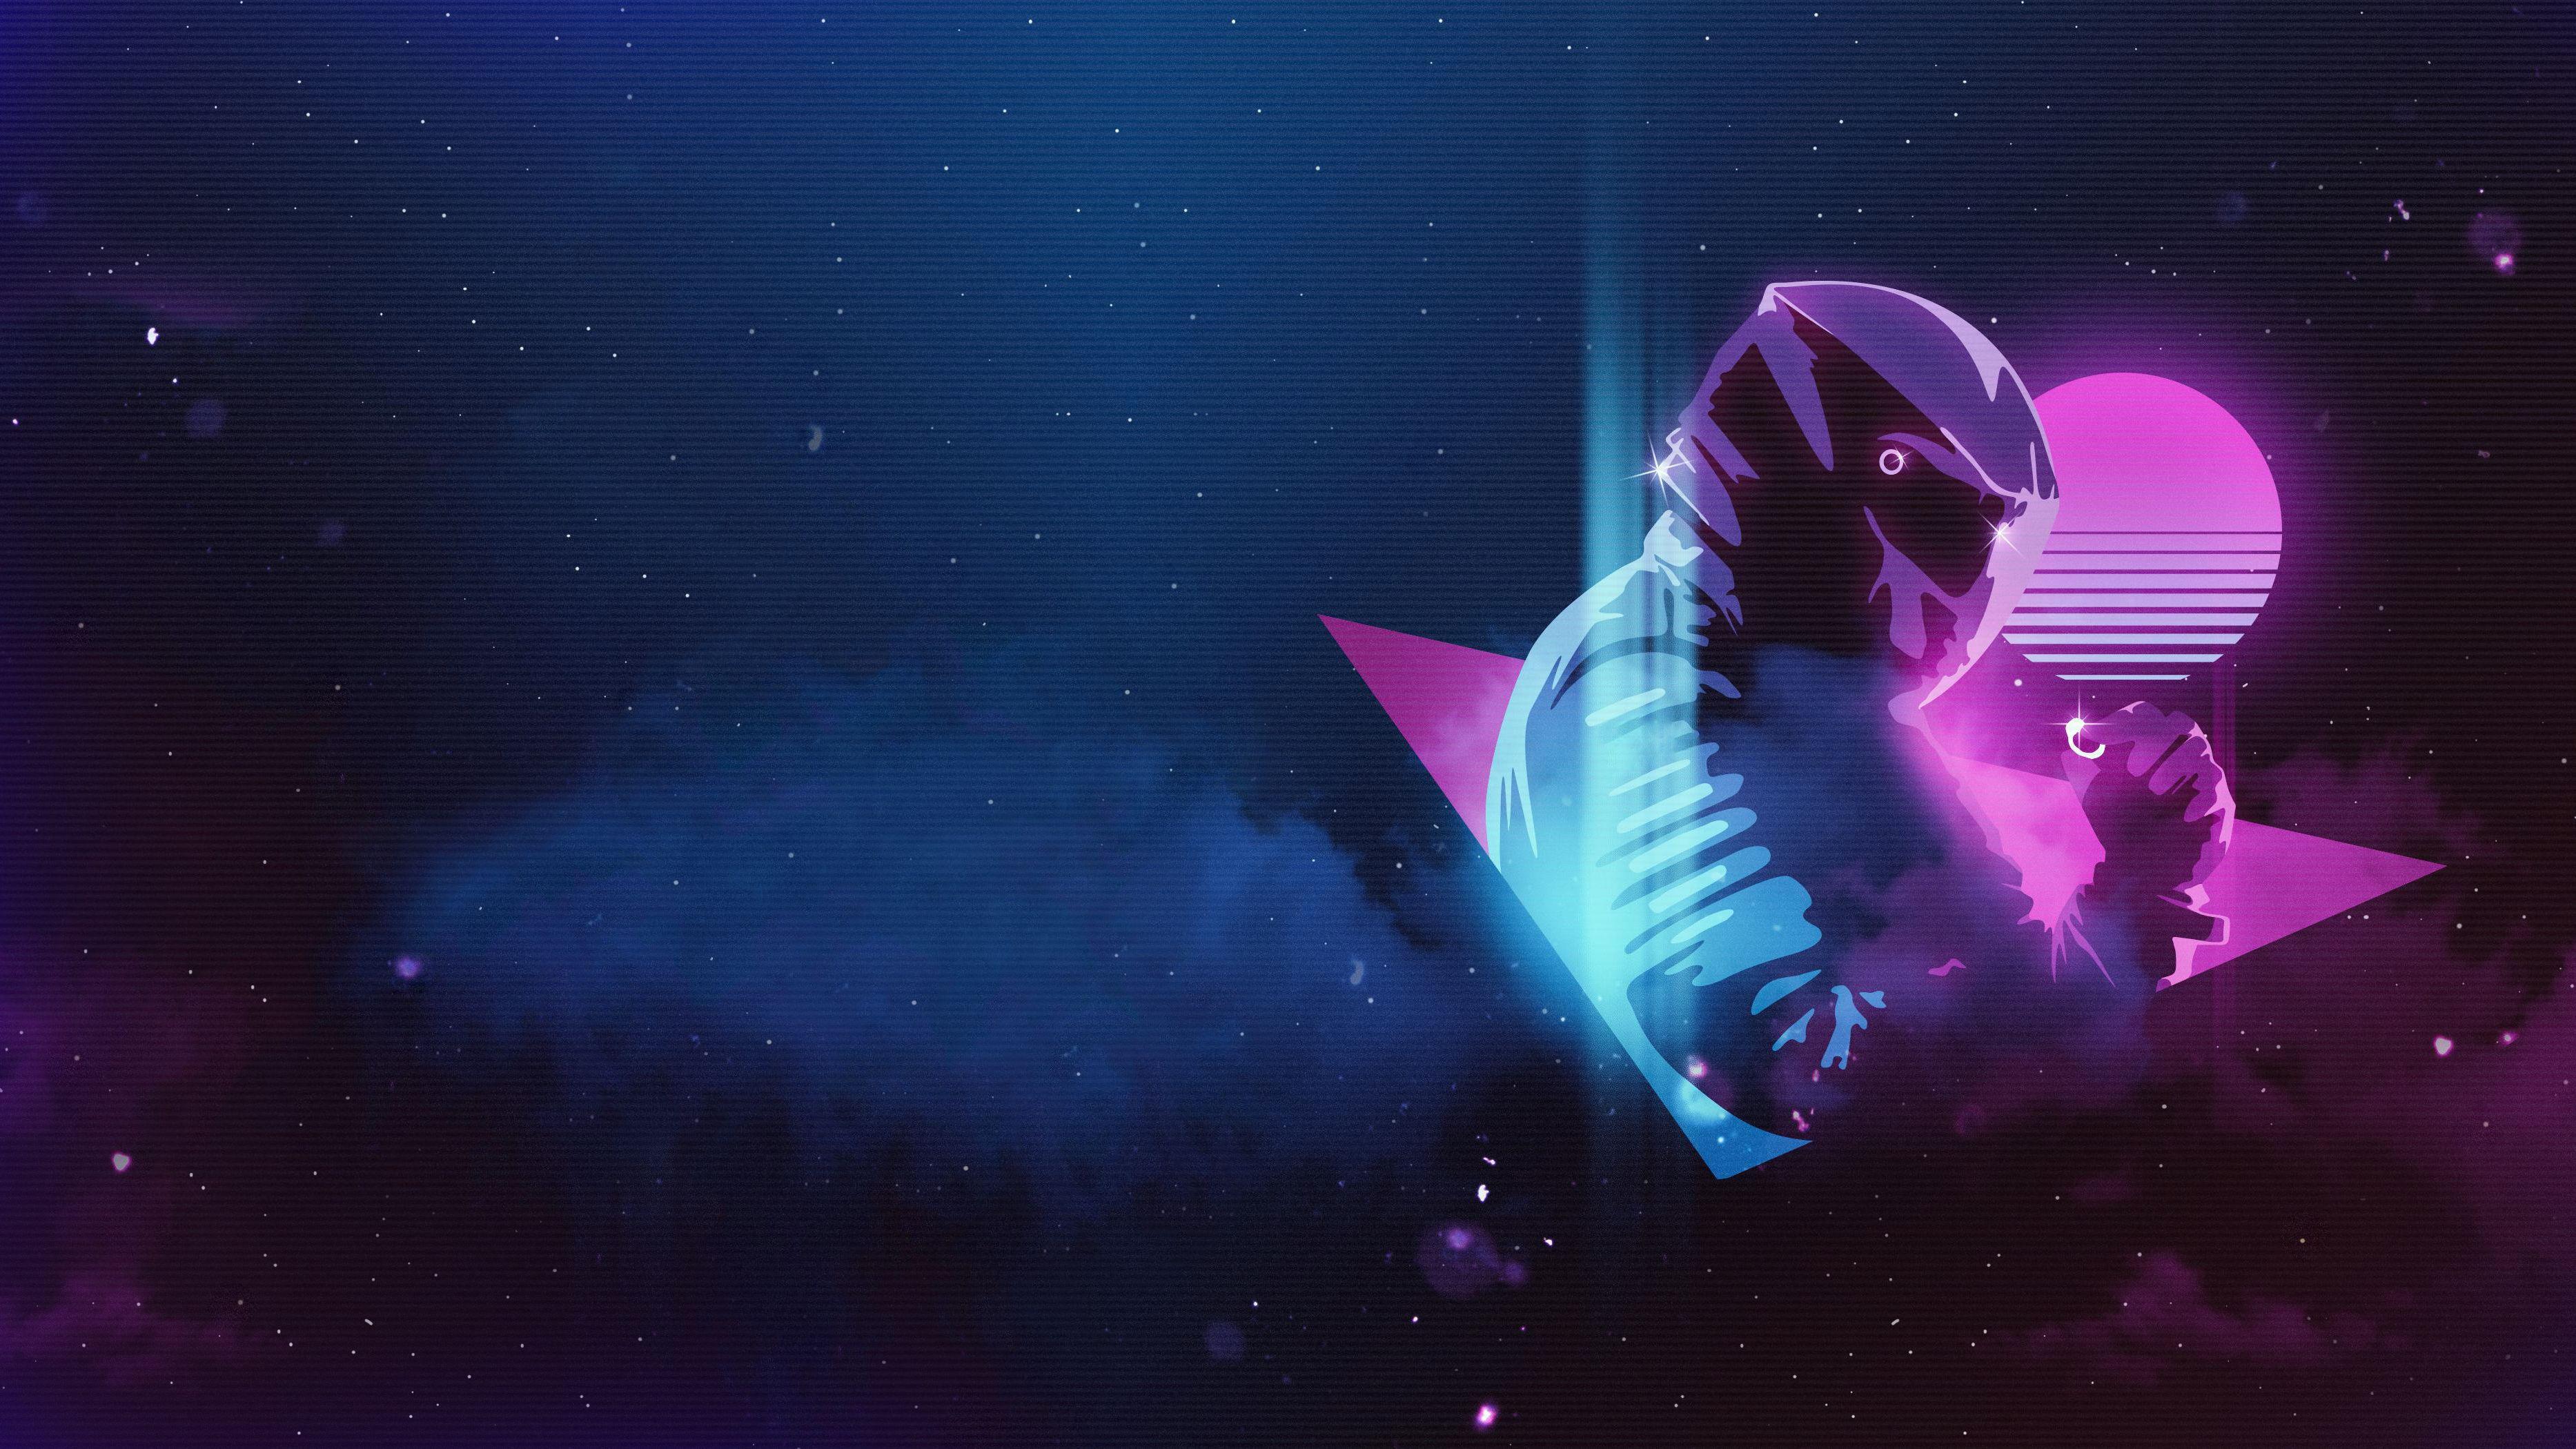 Synthwave Retro Wave Wallpaper 1920X1080 : 177 retrowave wallpapers ...